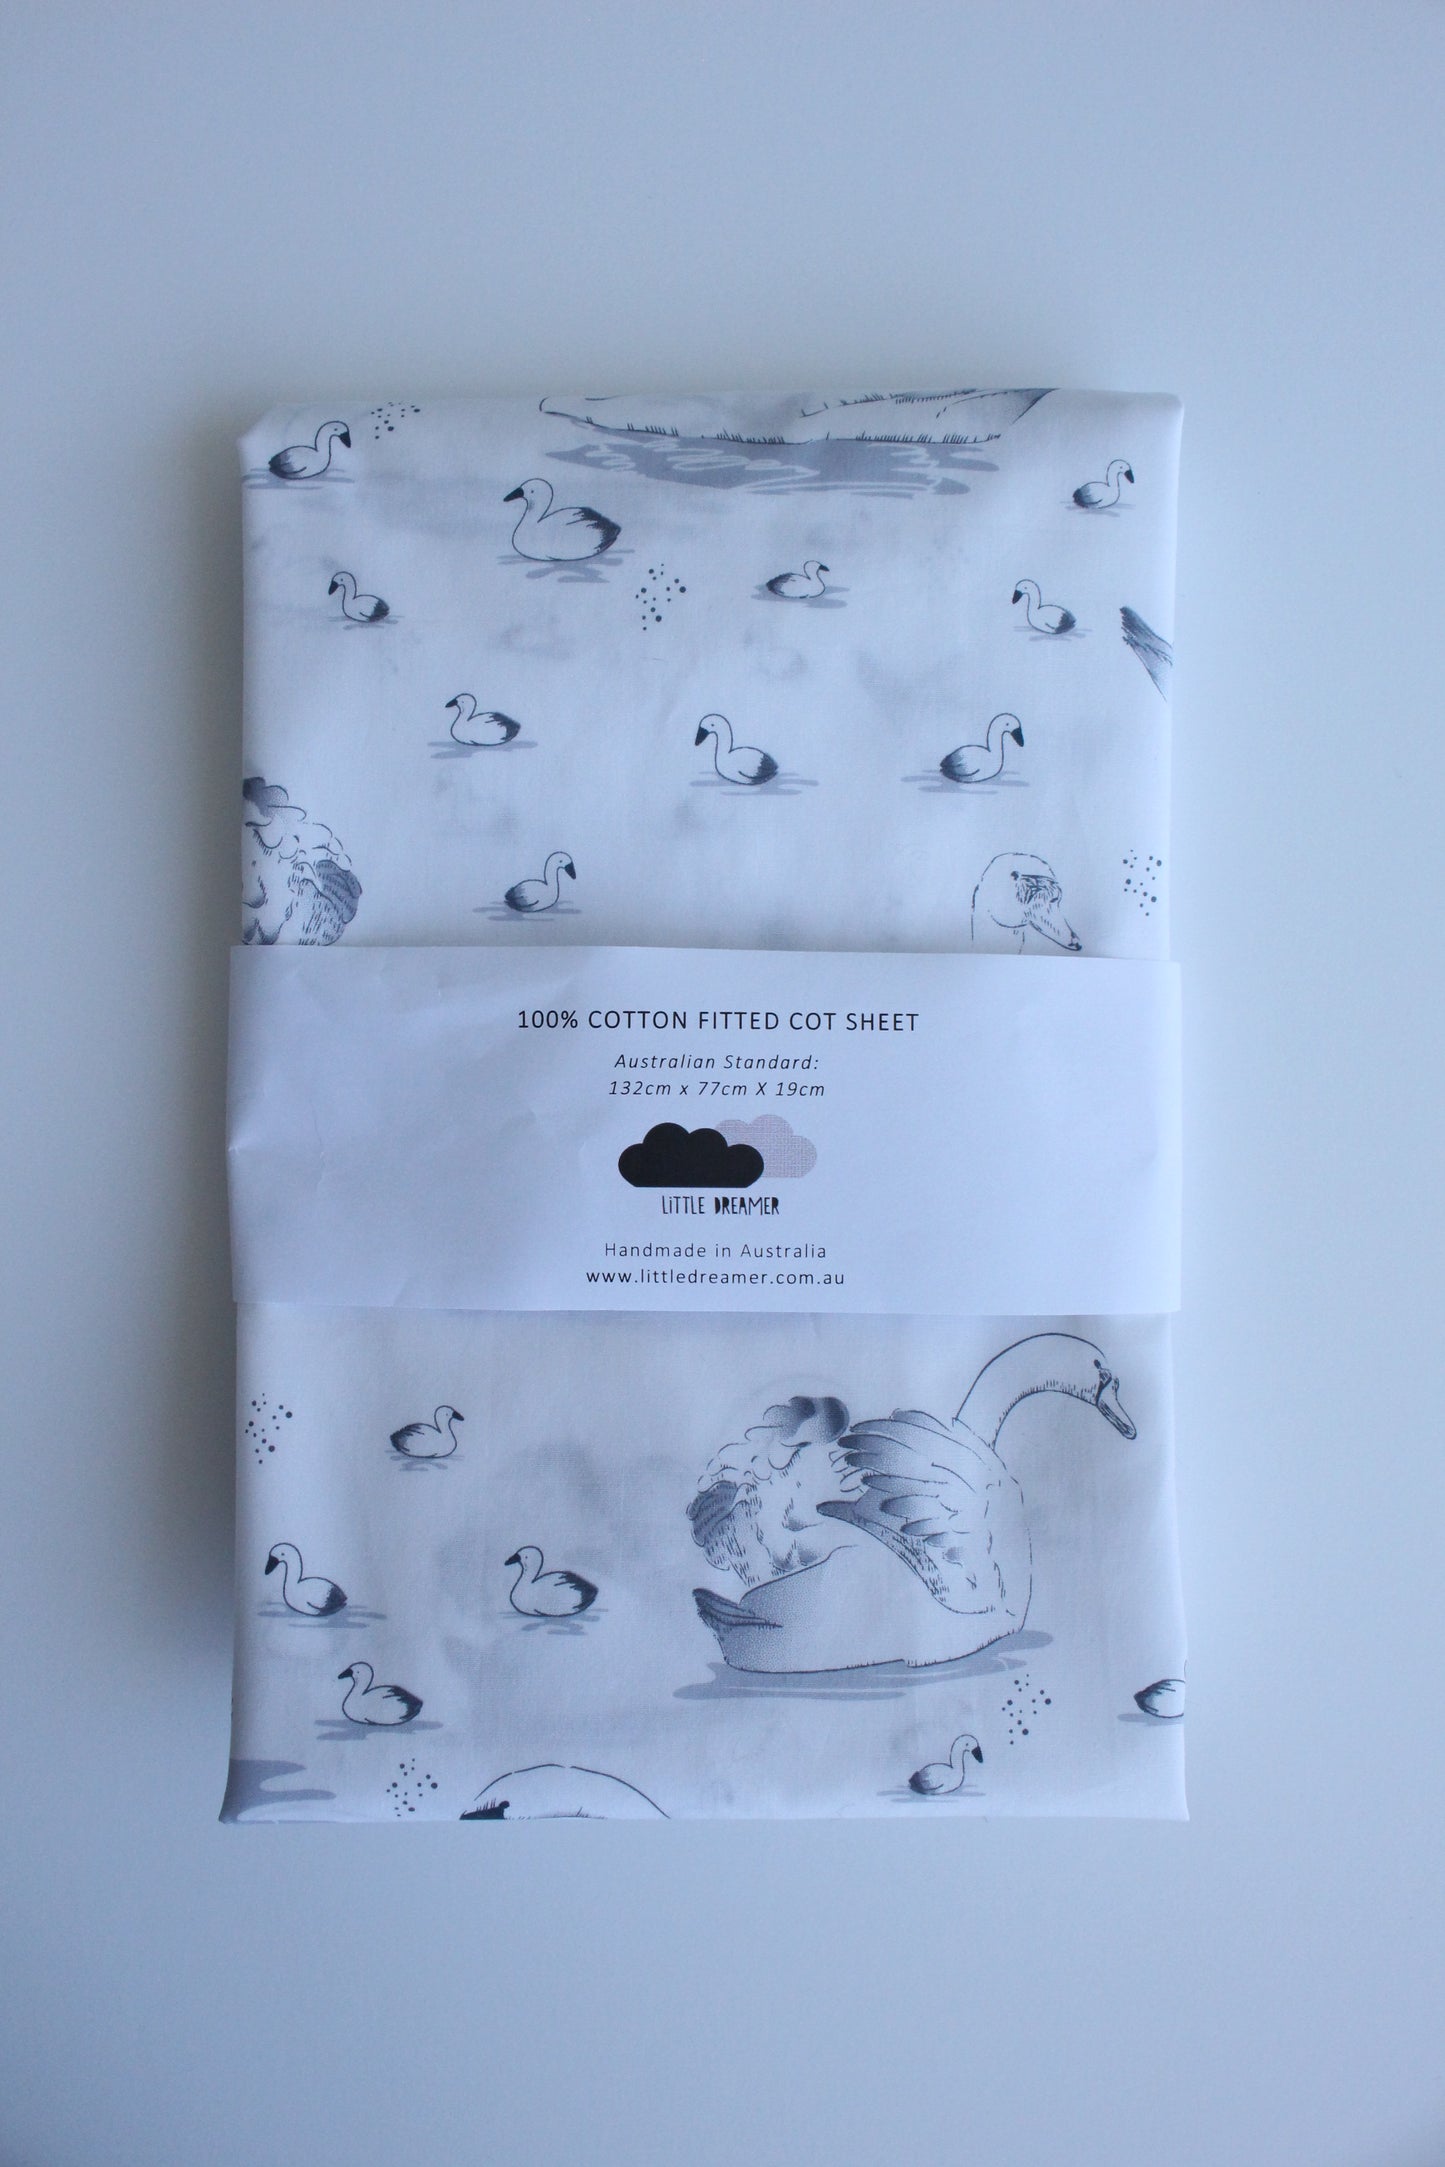 Fitted Cot Sheet - Swan Lake